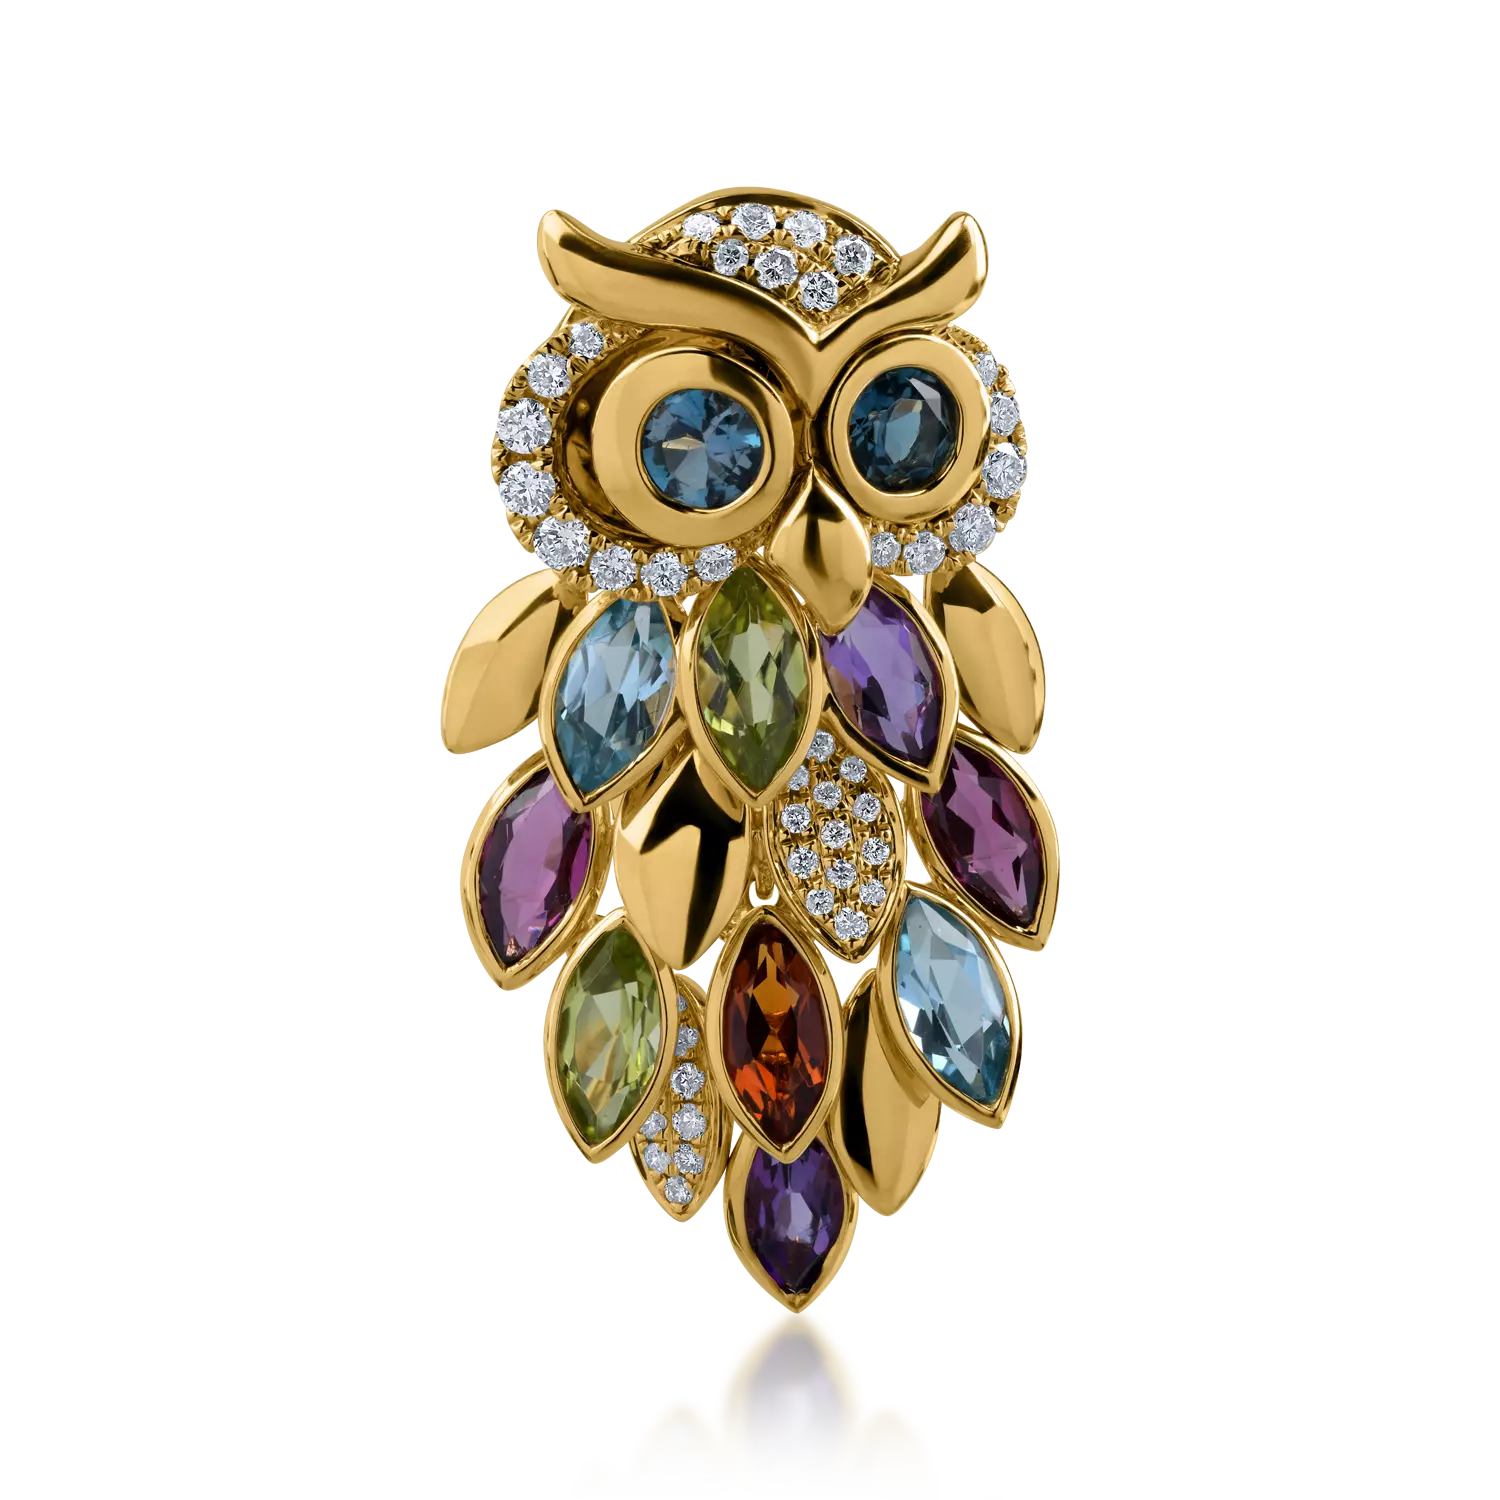 Yellow gold owl brooch with 3.23ct precious and semi-precious stones